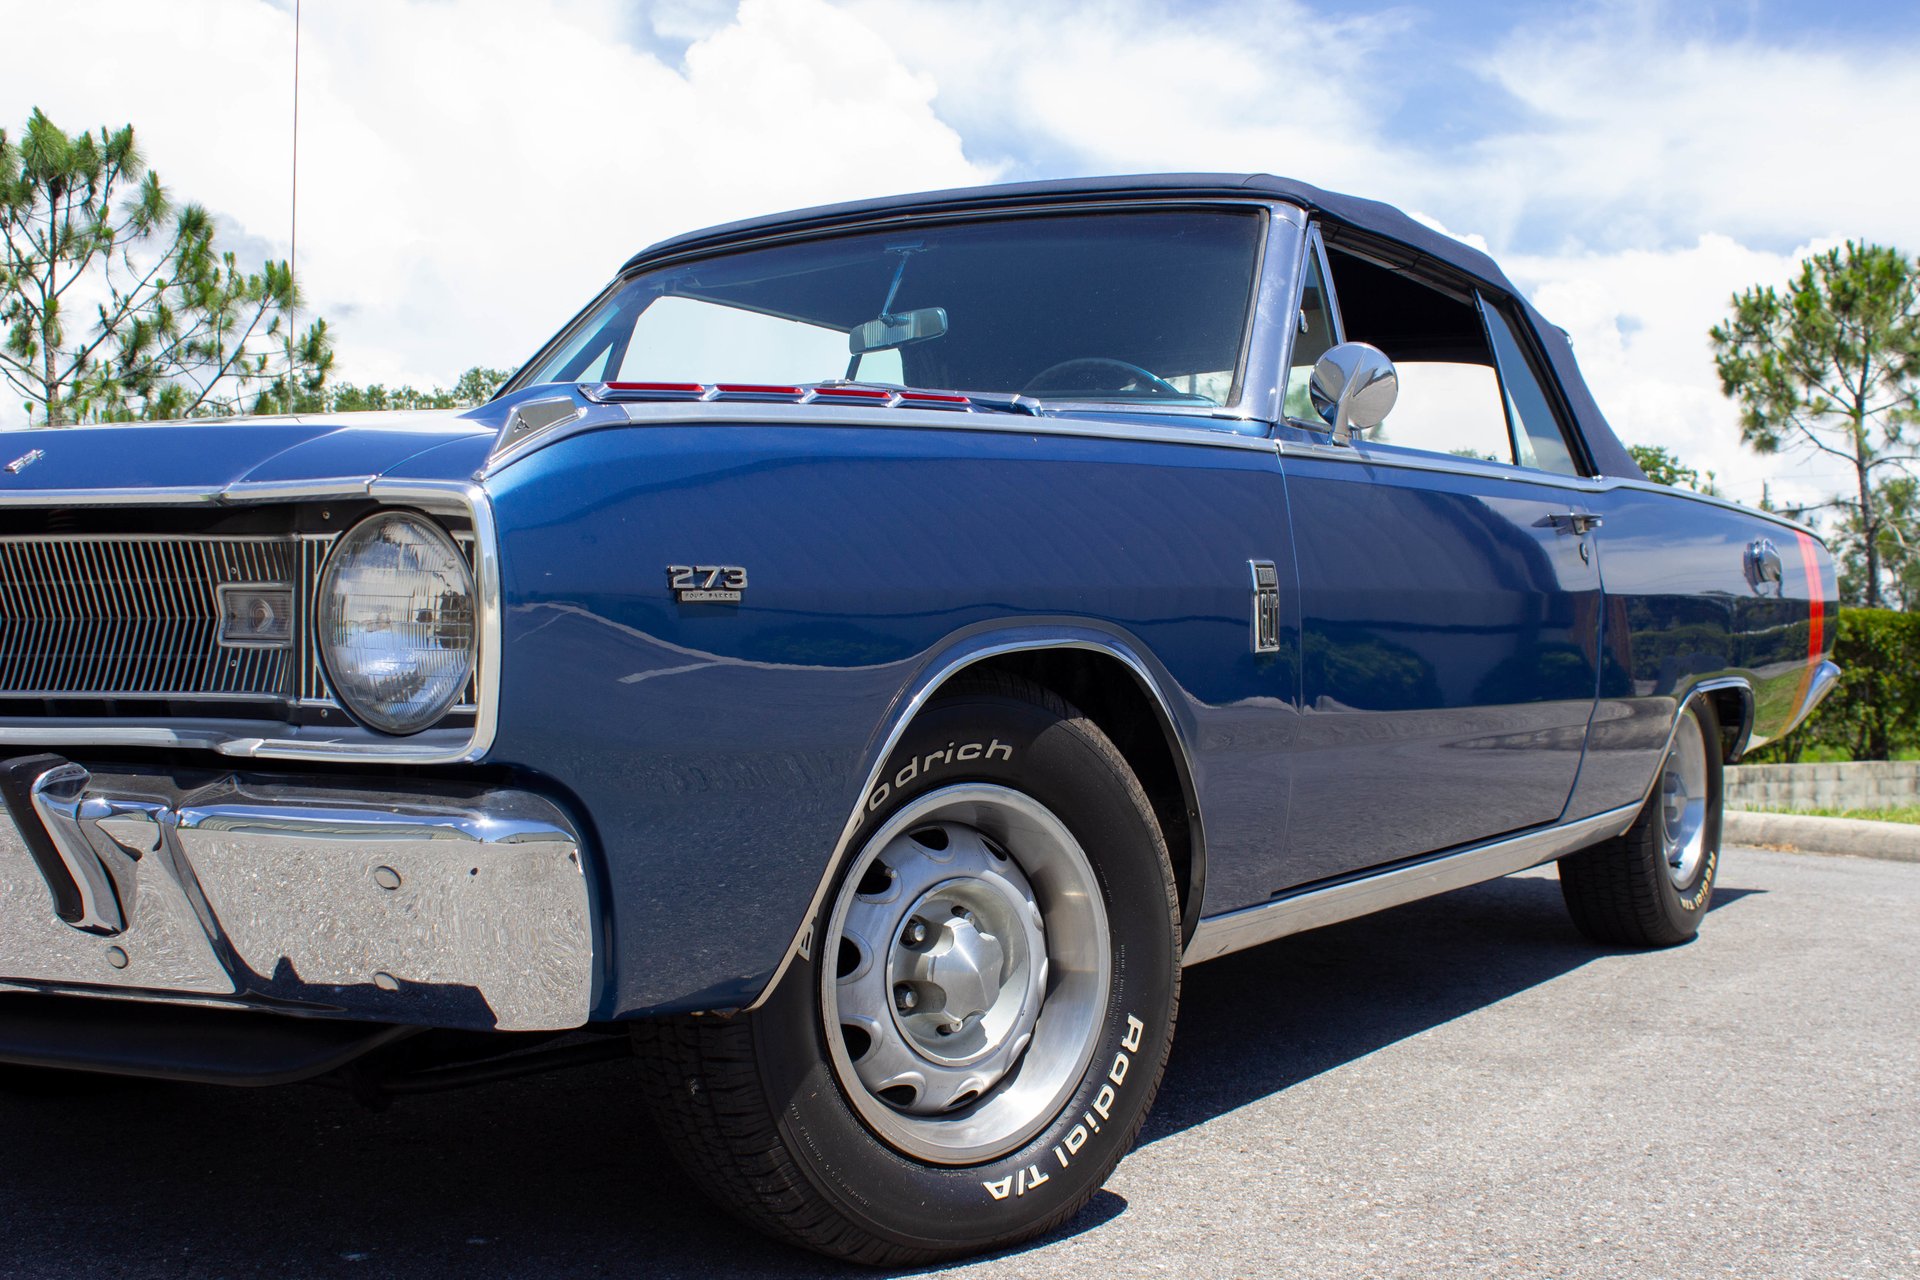 Arrowhead piedestal portugisisk 1967 Dodge Dart | Classic Cars & Used Cars For Sale in Tampa, FL